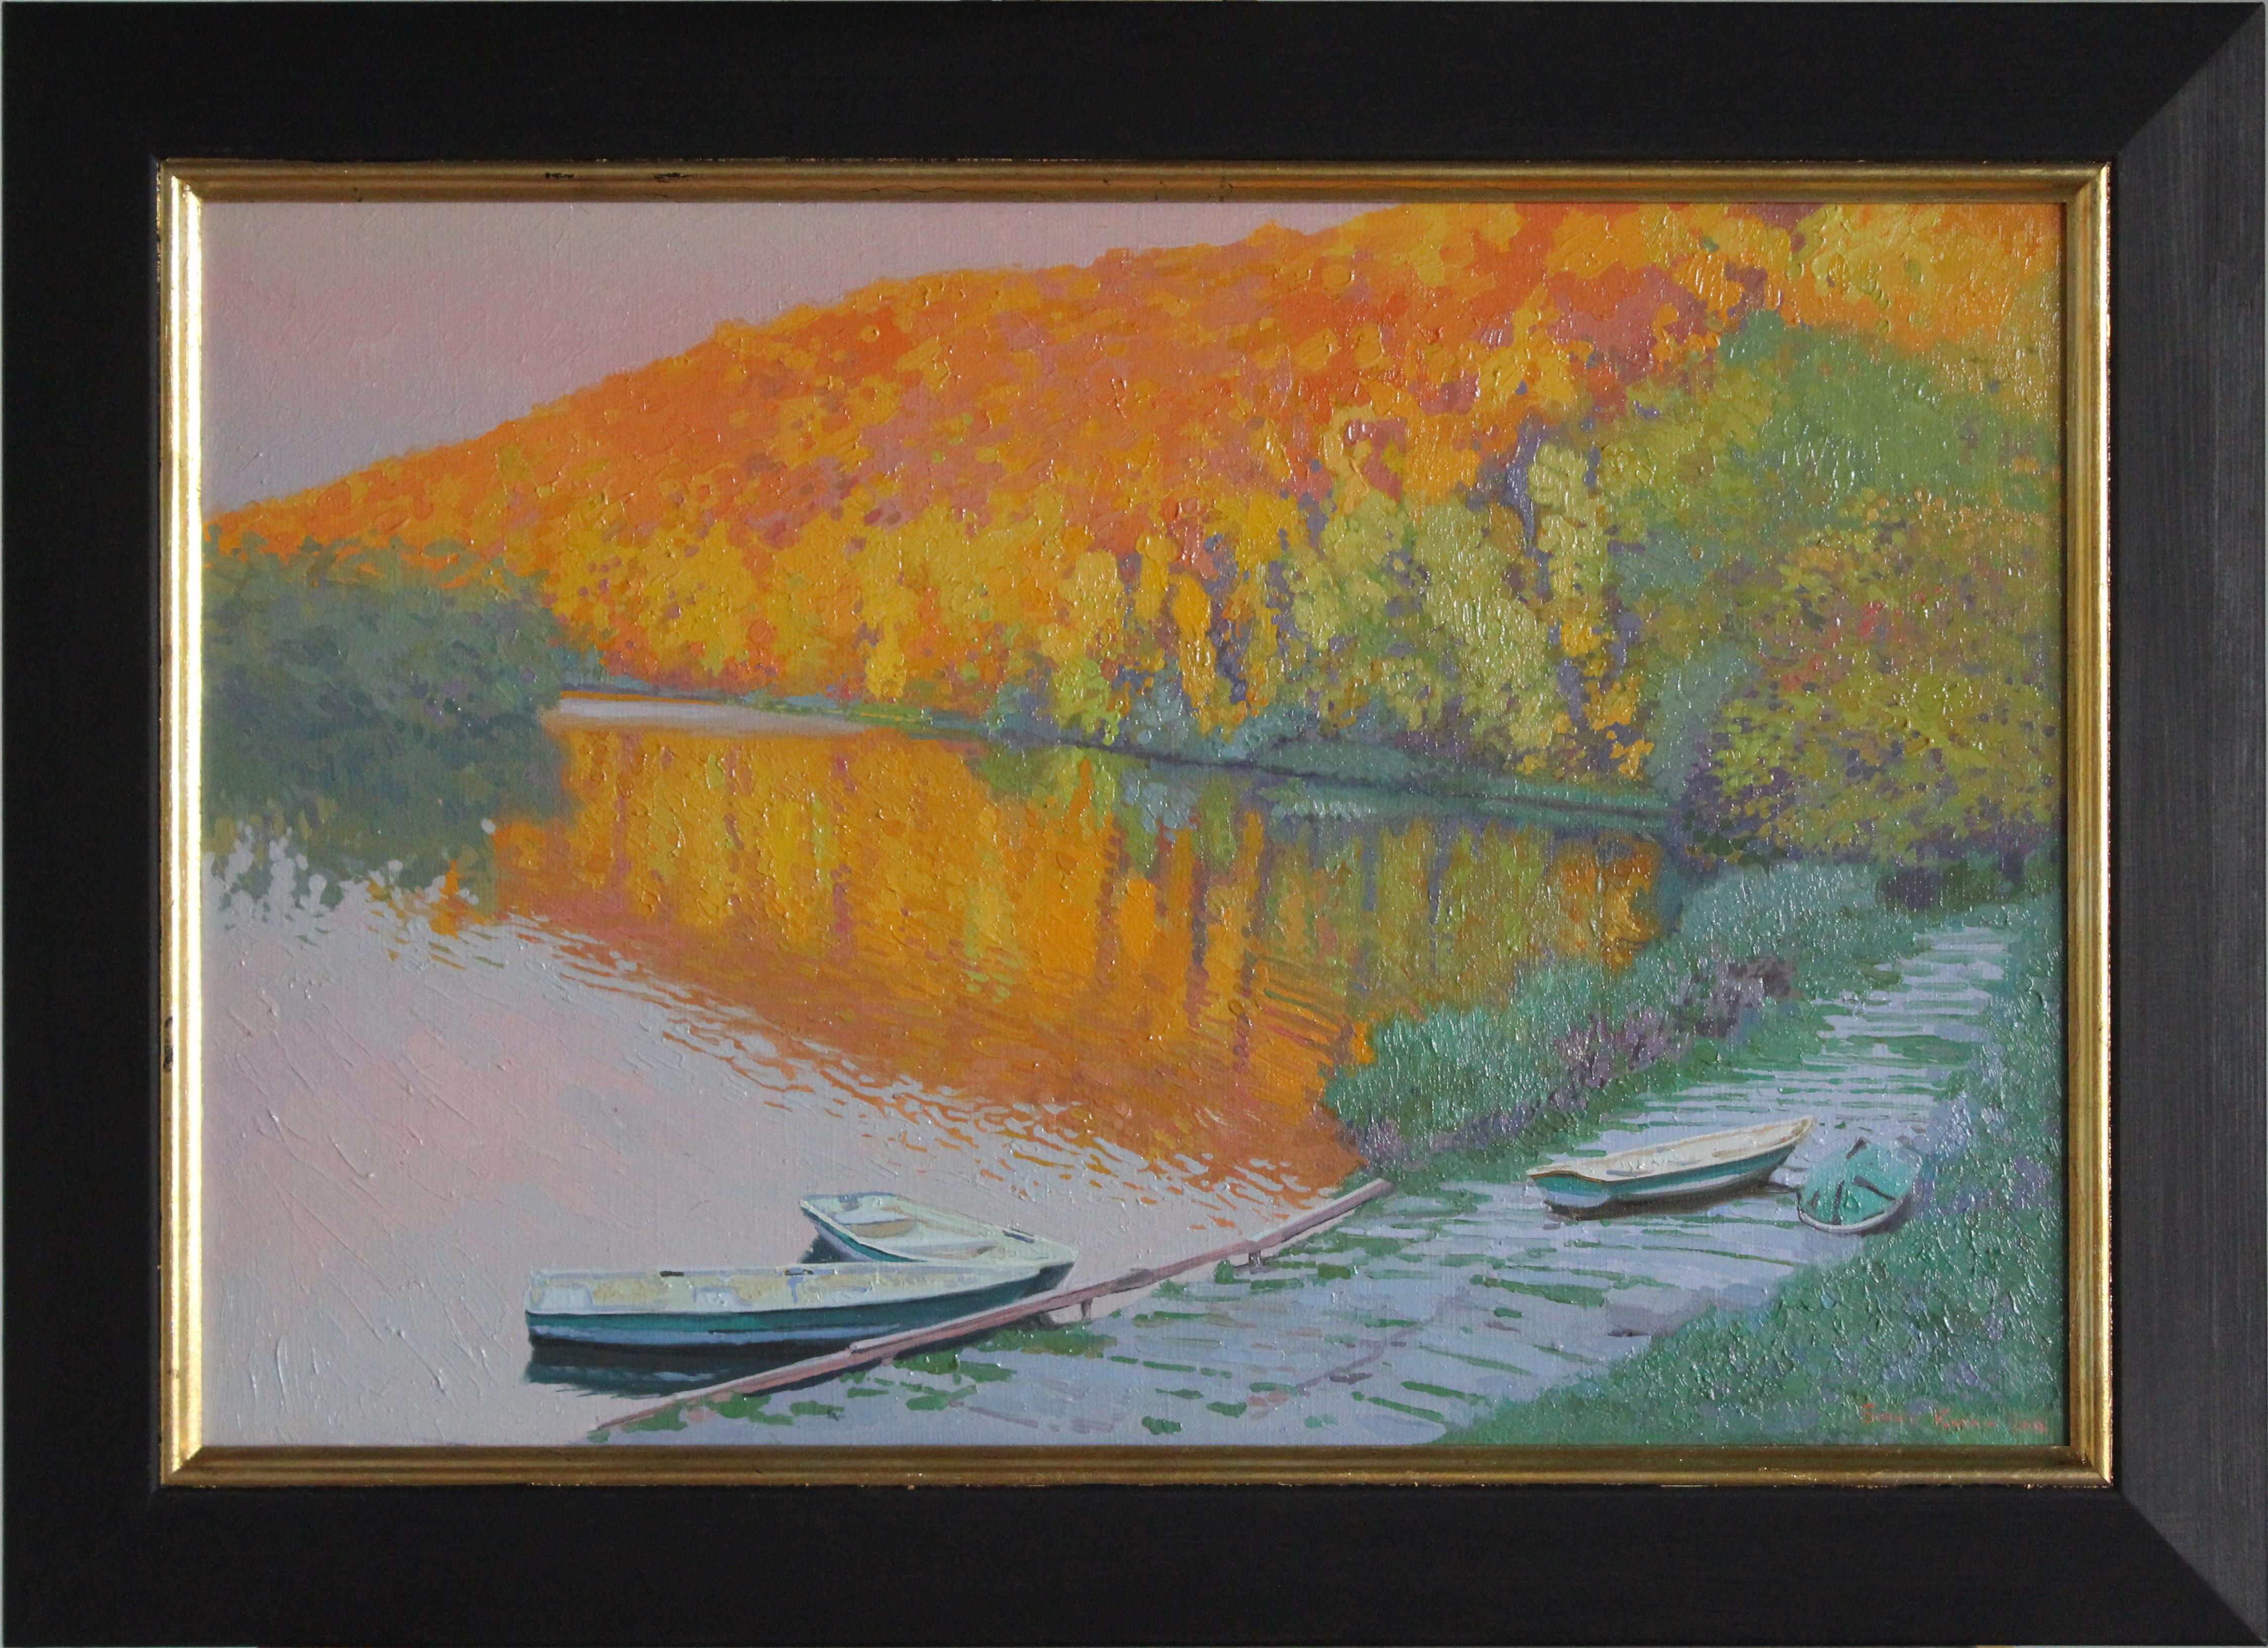 Sunset Landscape Forest and Water with Boats, Krasivaya mecha river painting 3